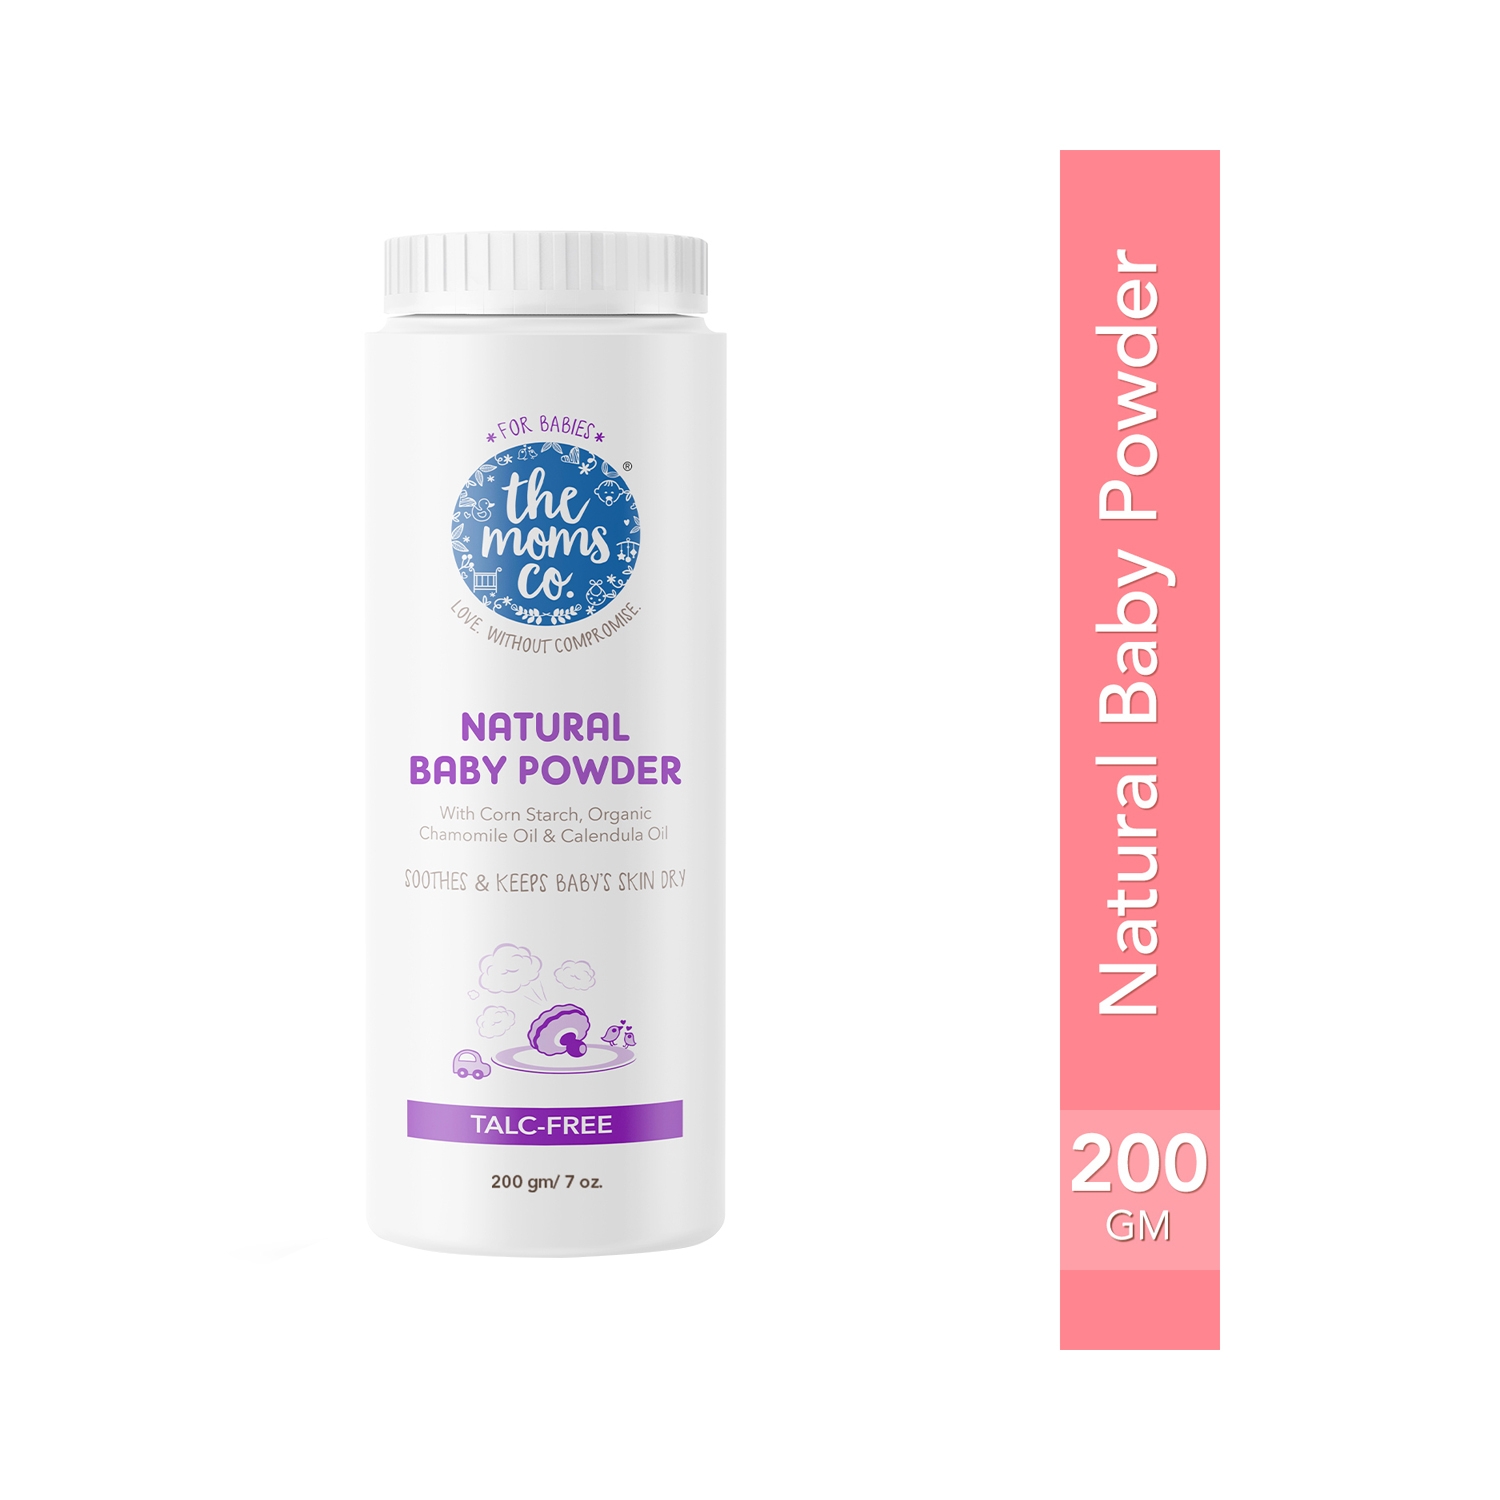 The Mom's Co. Talc-Free Natural Baby Powder (200g)